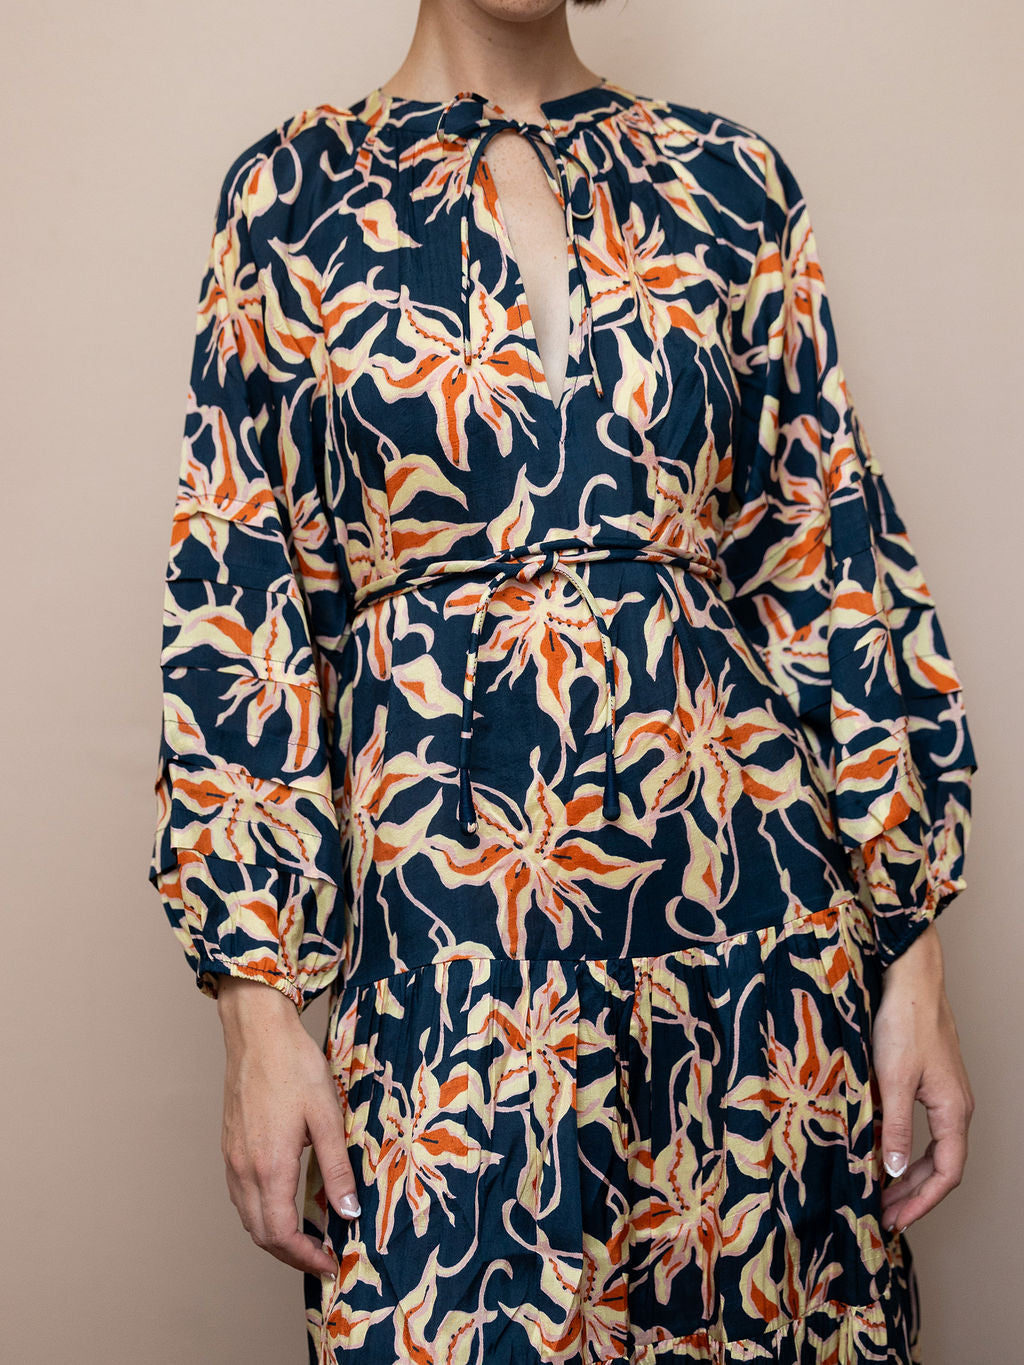 Woman wearing navy dress with orange floral pattern against pink background